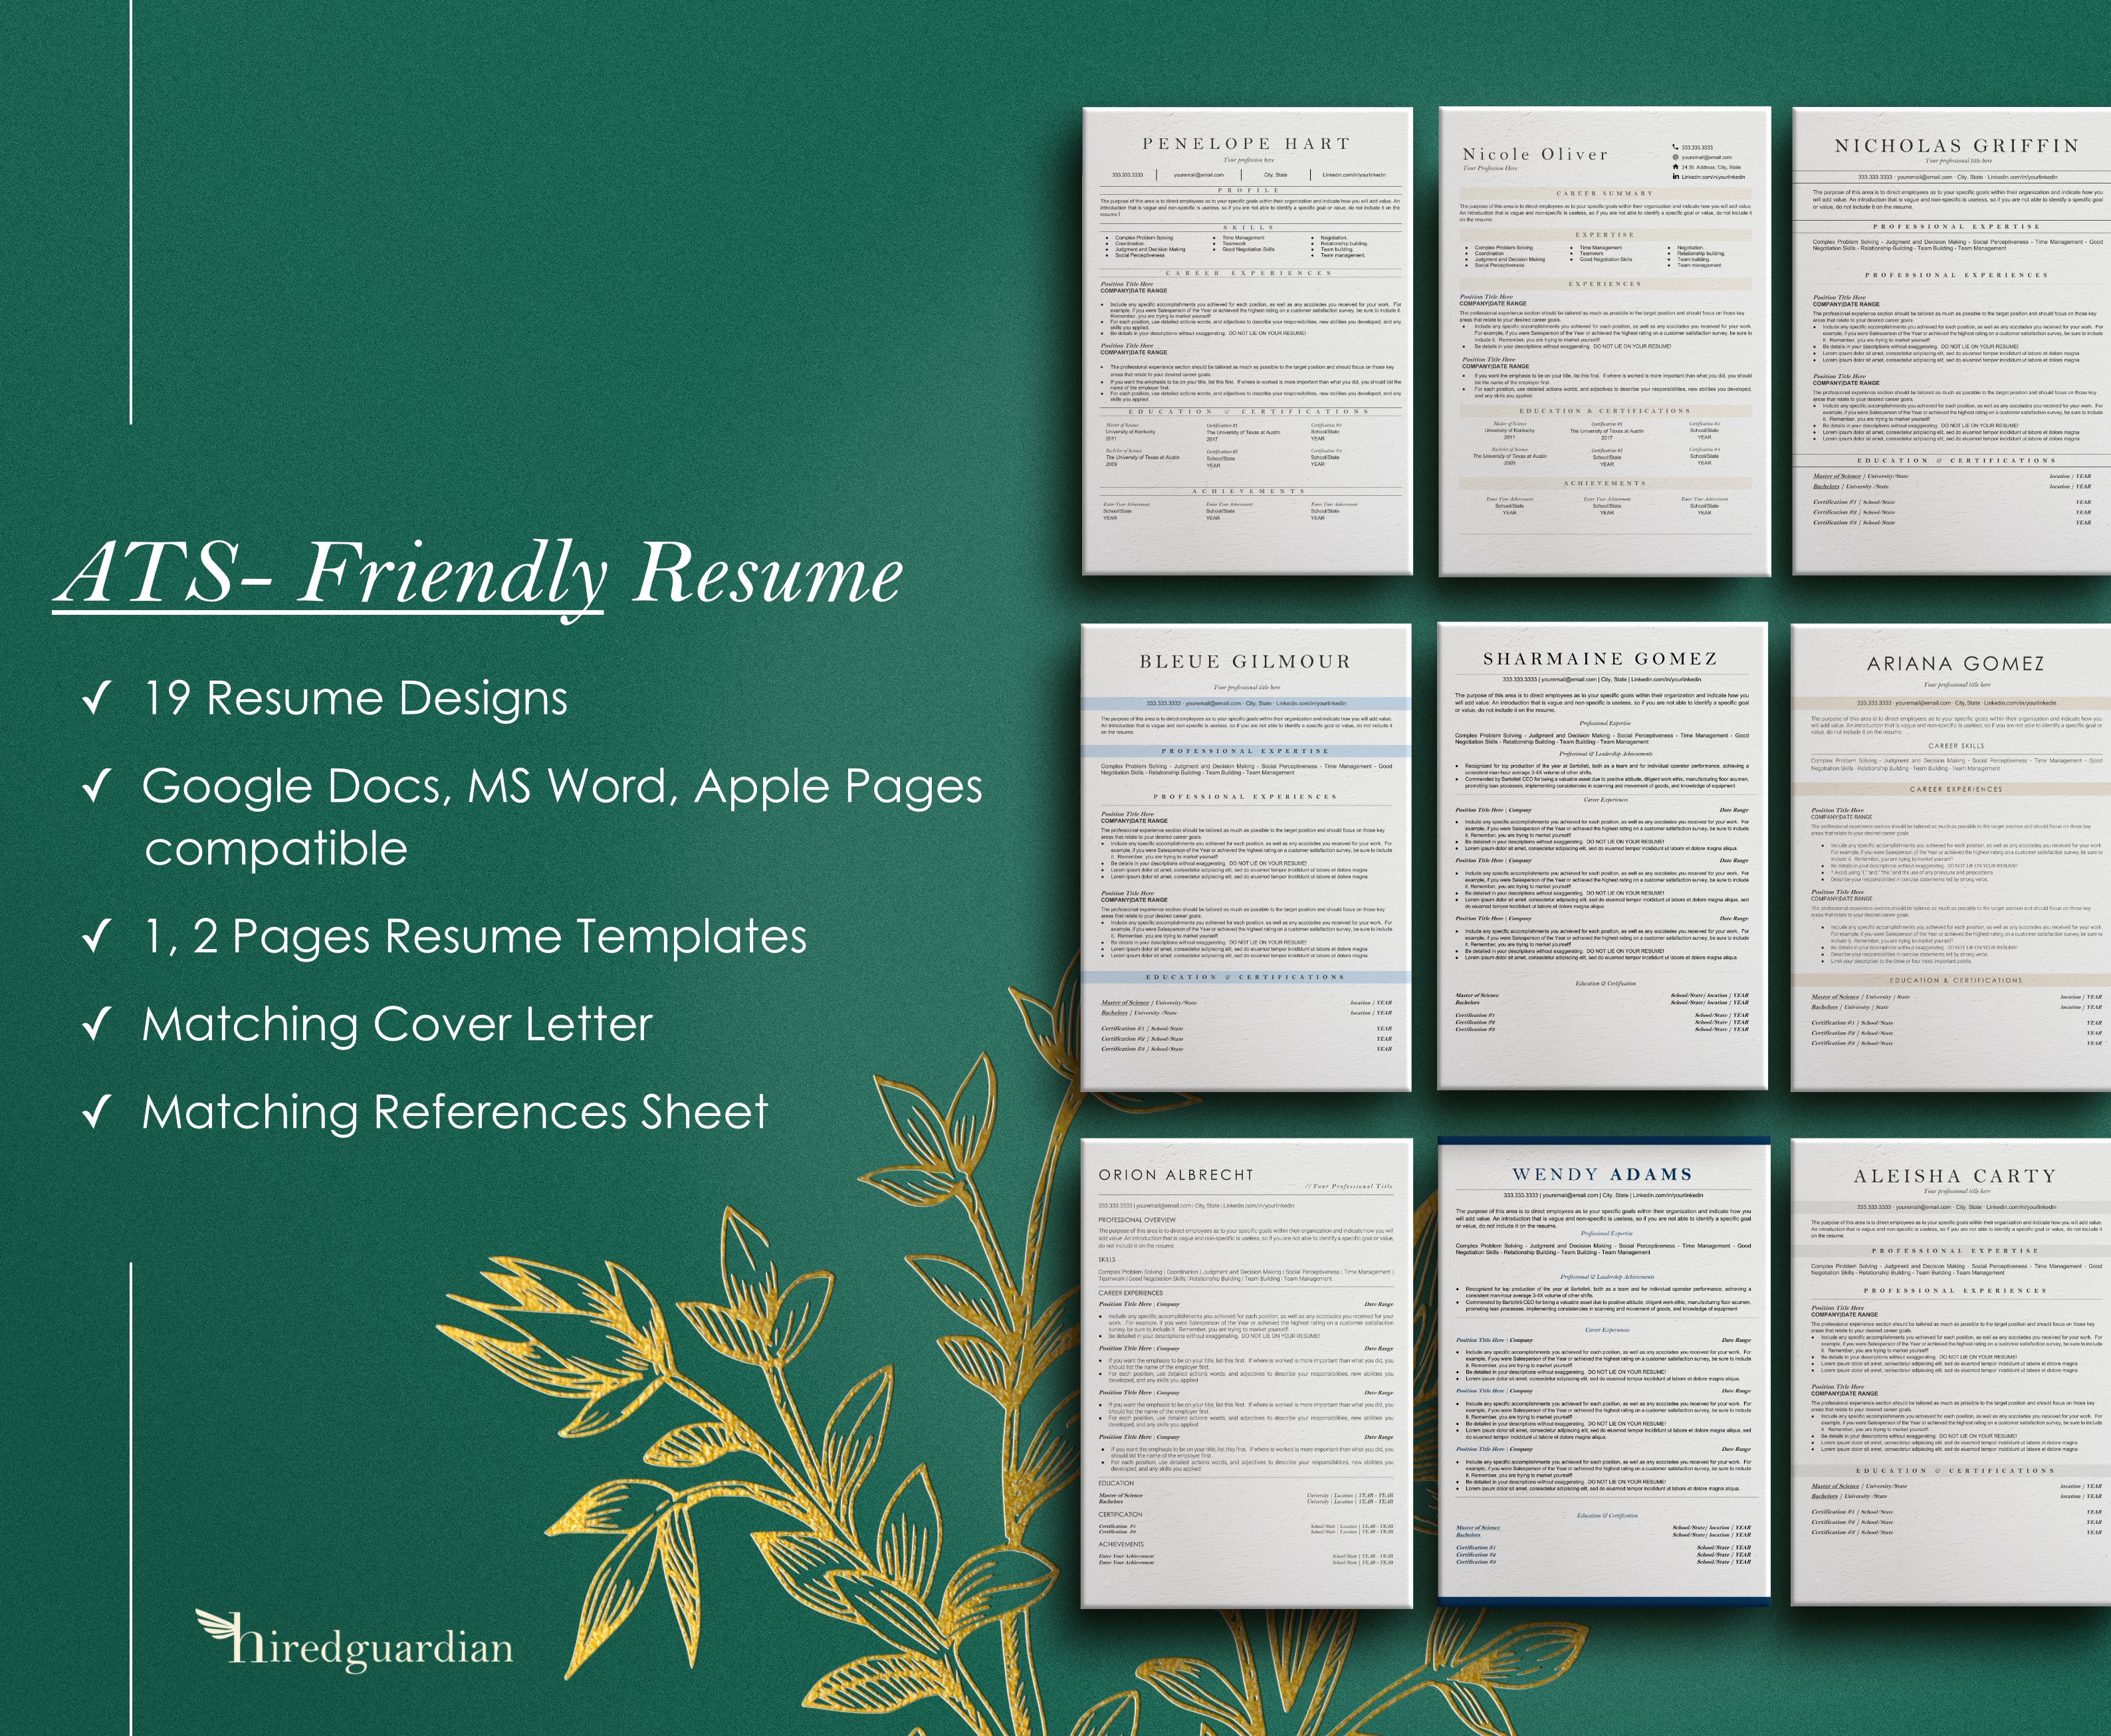 Bunch of resumes on a green background.